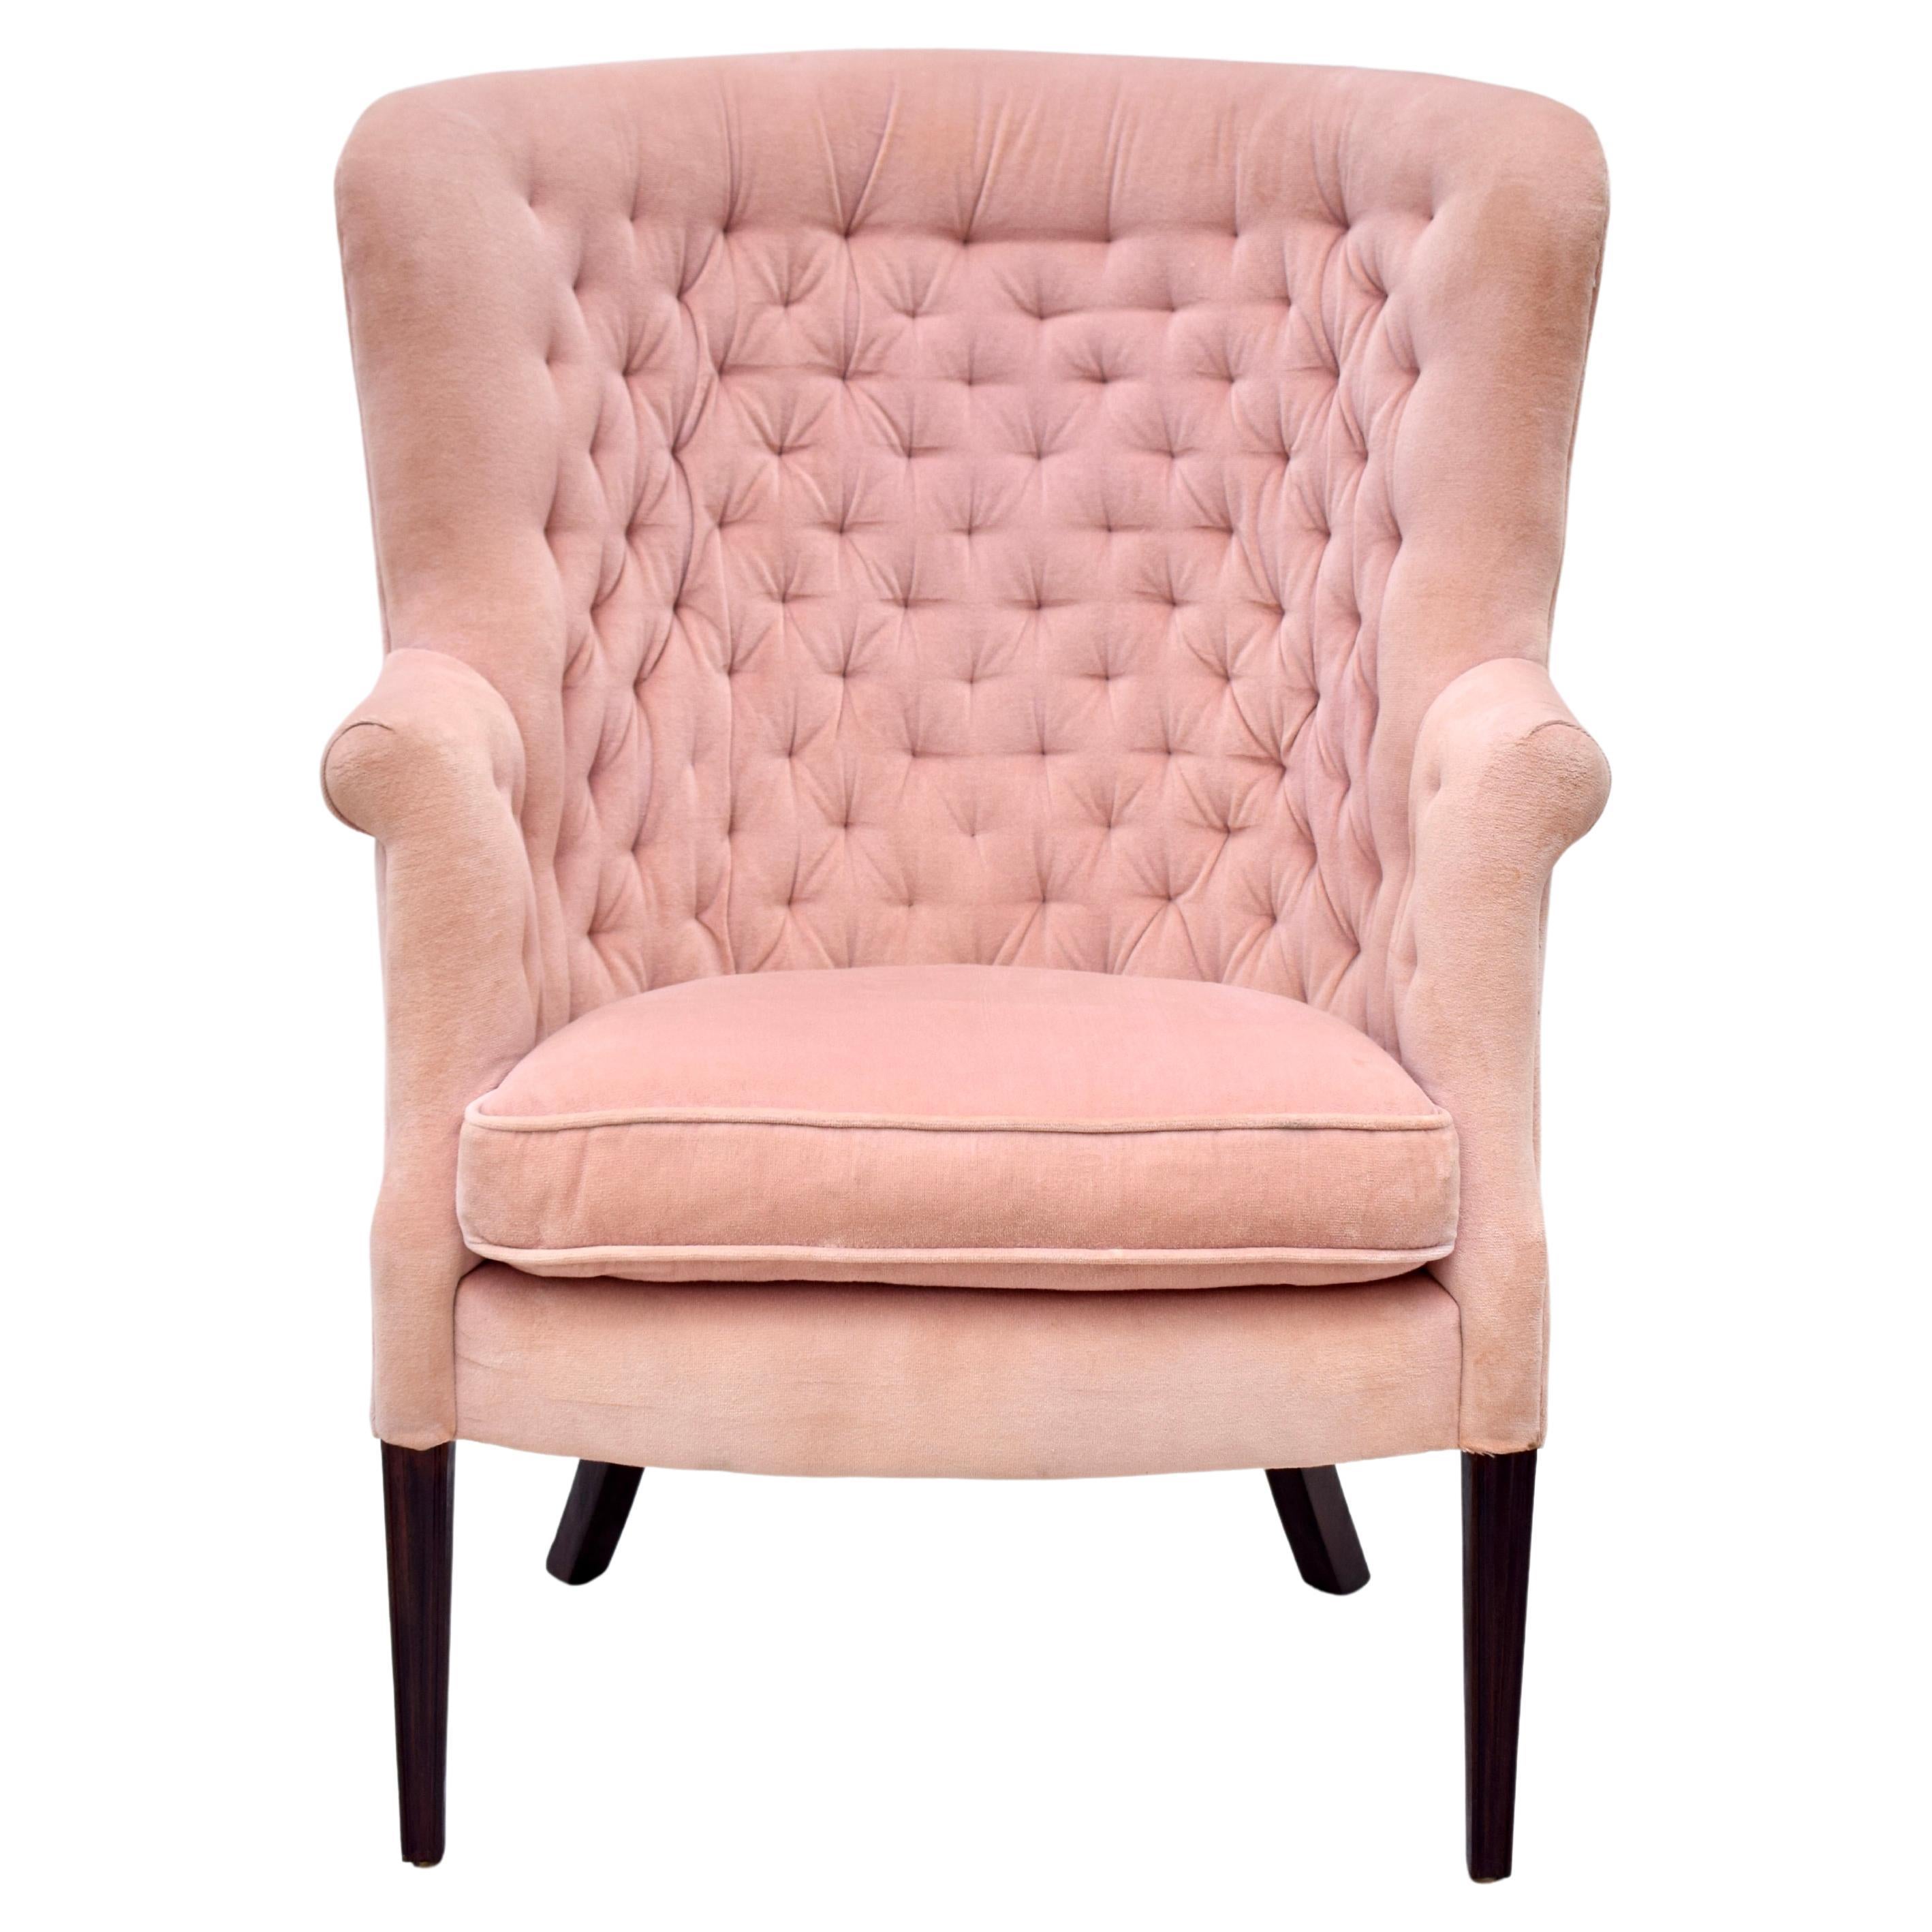 Tufted Curved Back Wing Chair For Sale